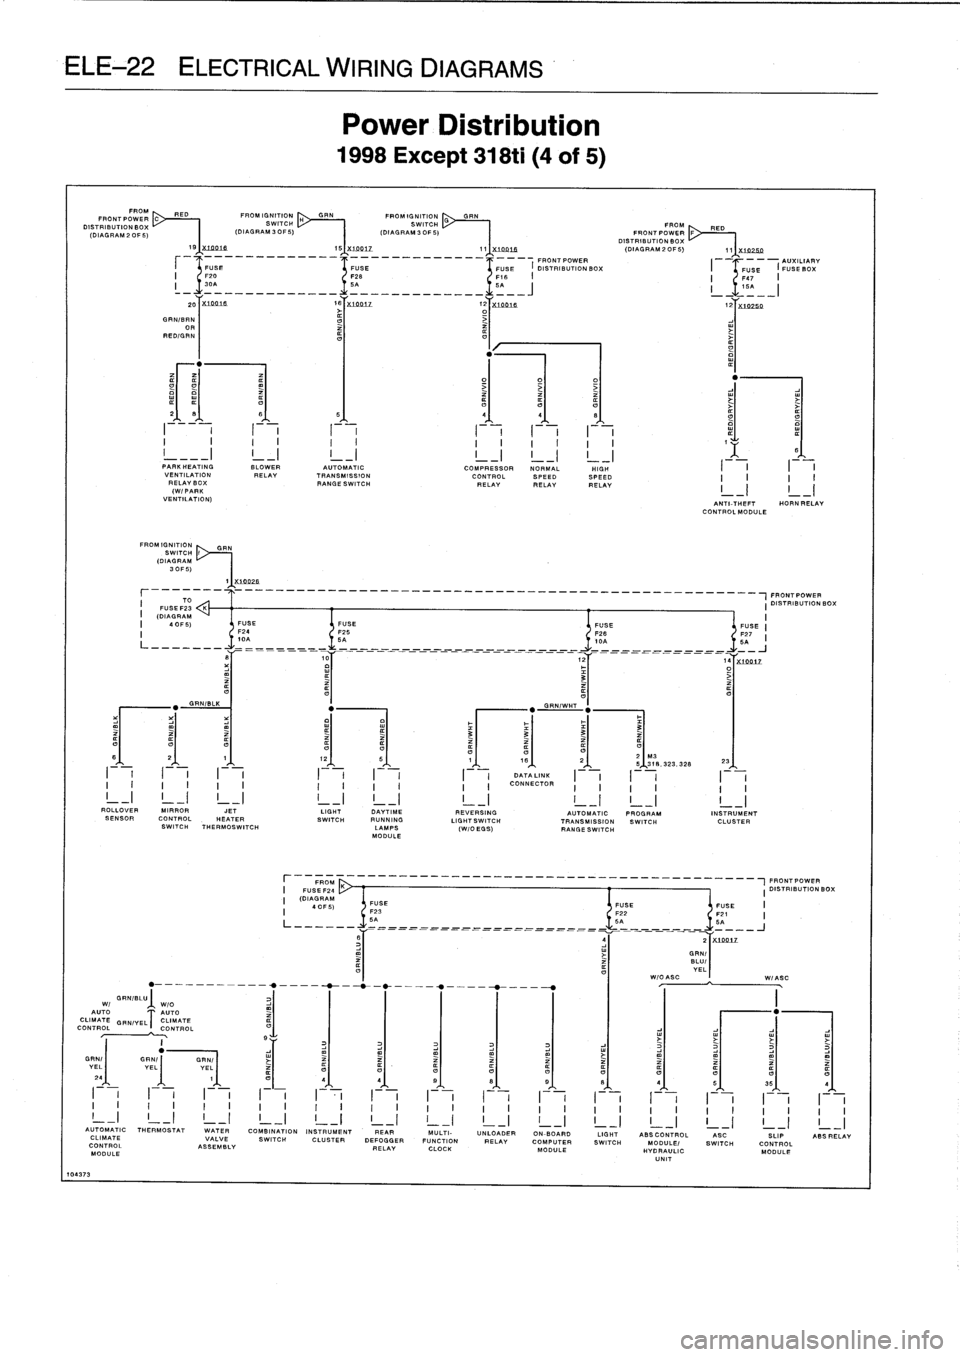 BMW 325i 1993 E36 Owners Guide 
ELE-22

ELECTRICAL
WIRING
DIAGRAMS

GRNIBLU
Wl

WIO

AUTO

AUTO

CLIMATE

GEN/YELT
CLIMATE

CONTROL

CONTROL

10437
3

FP

OM~
	

PED
FRONTPOWER
DISTRIBUTION

BOY%

(DIAGRAM

2
OF
5)

S

FROMIGNITION